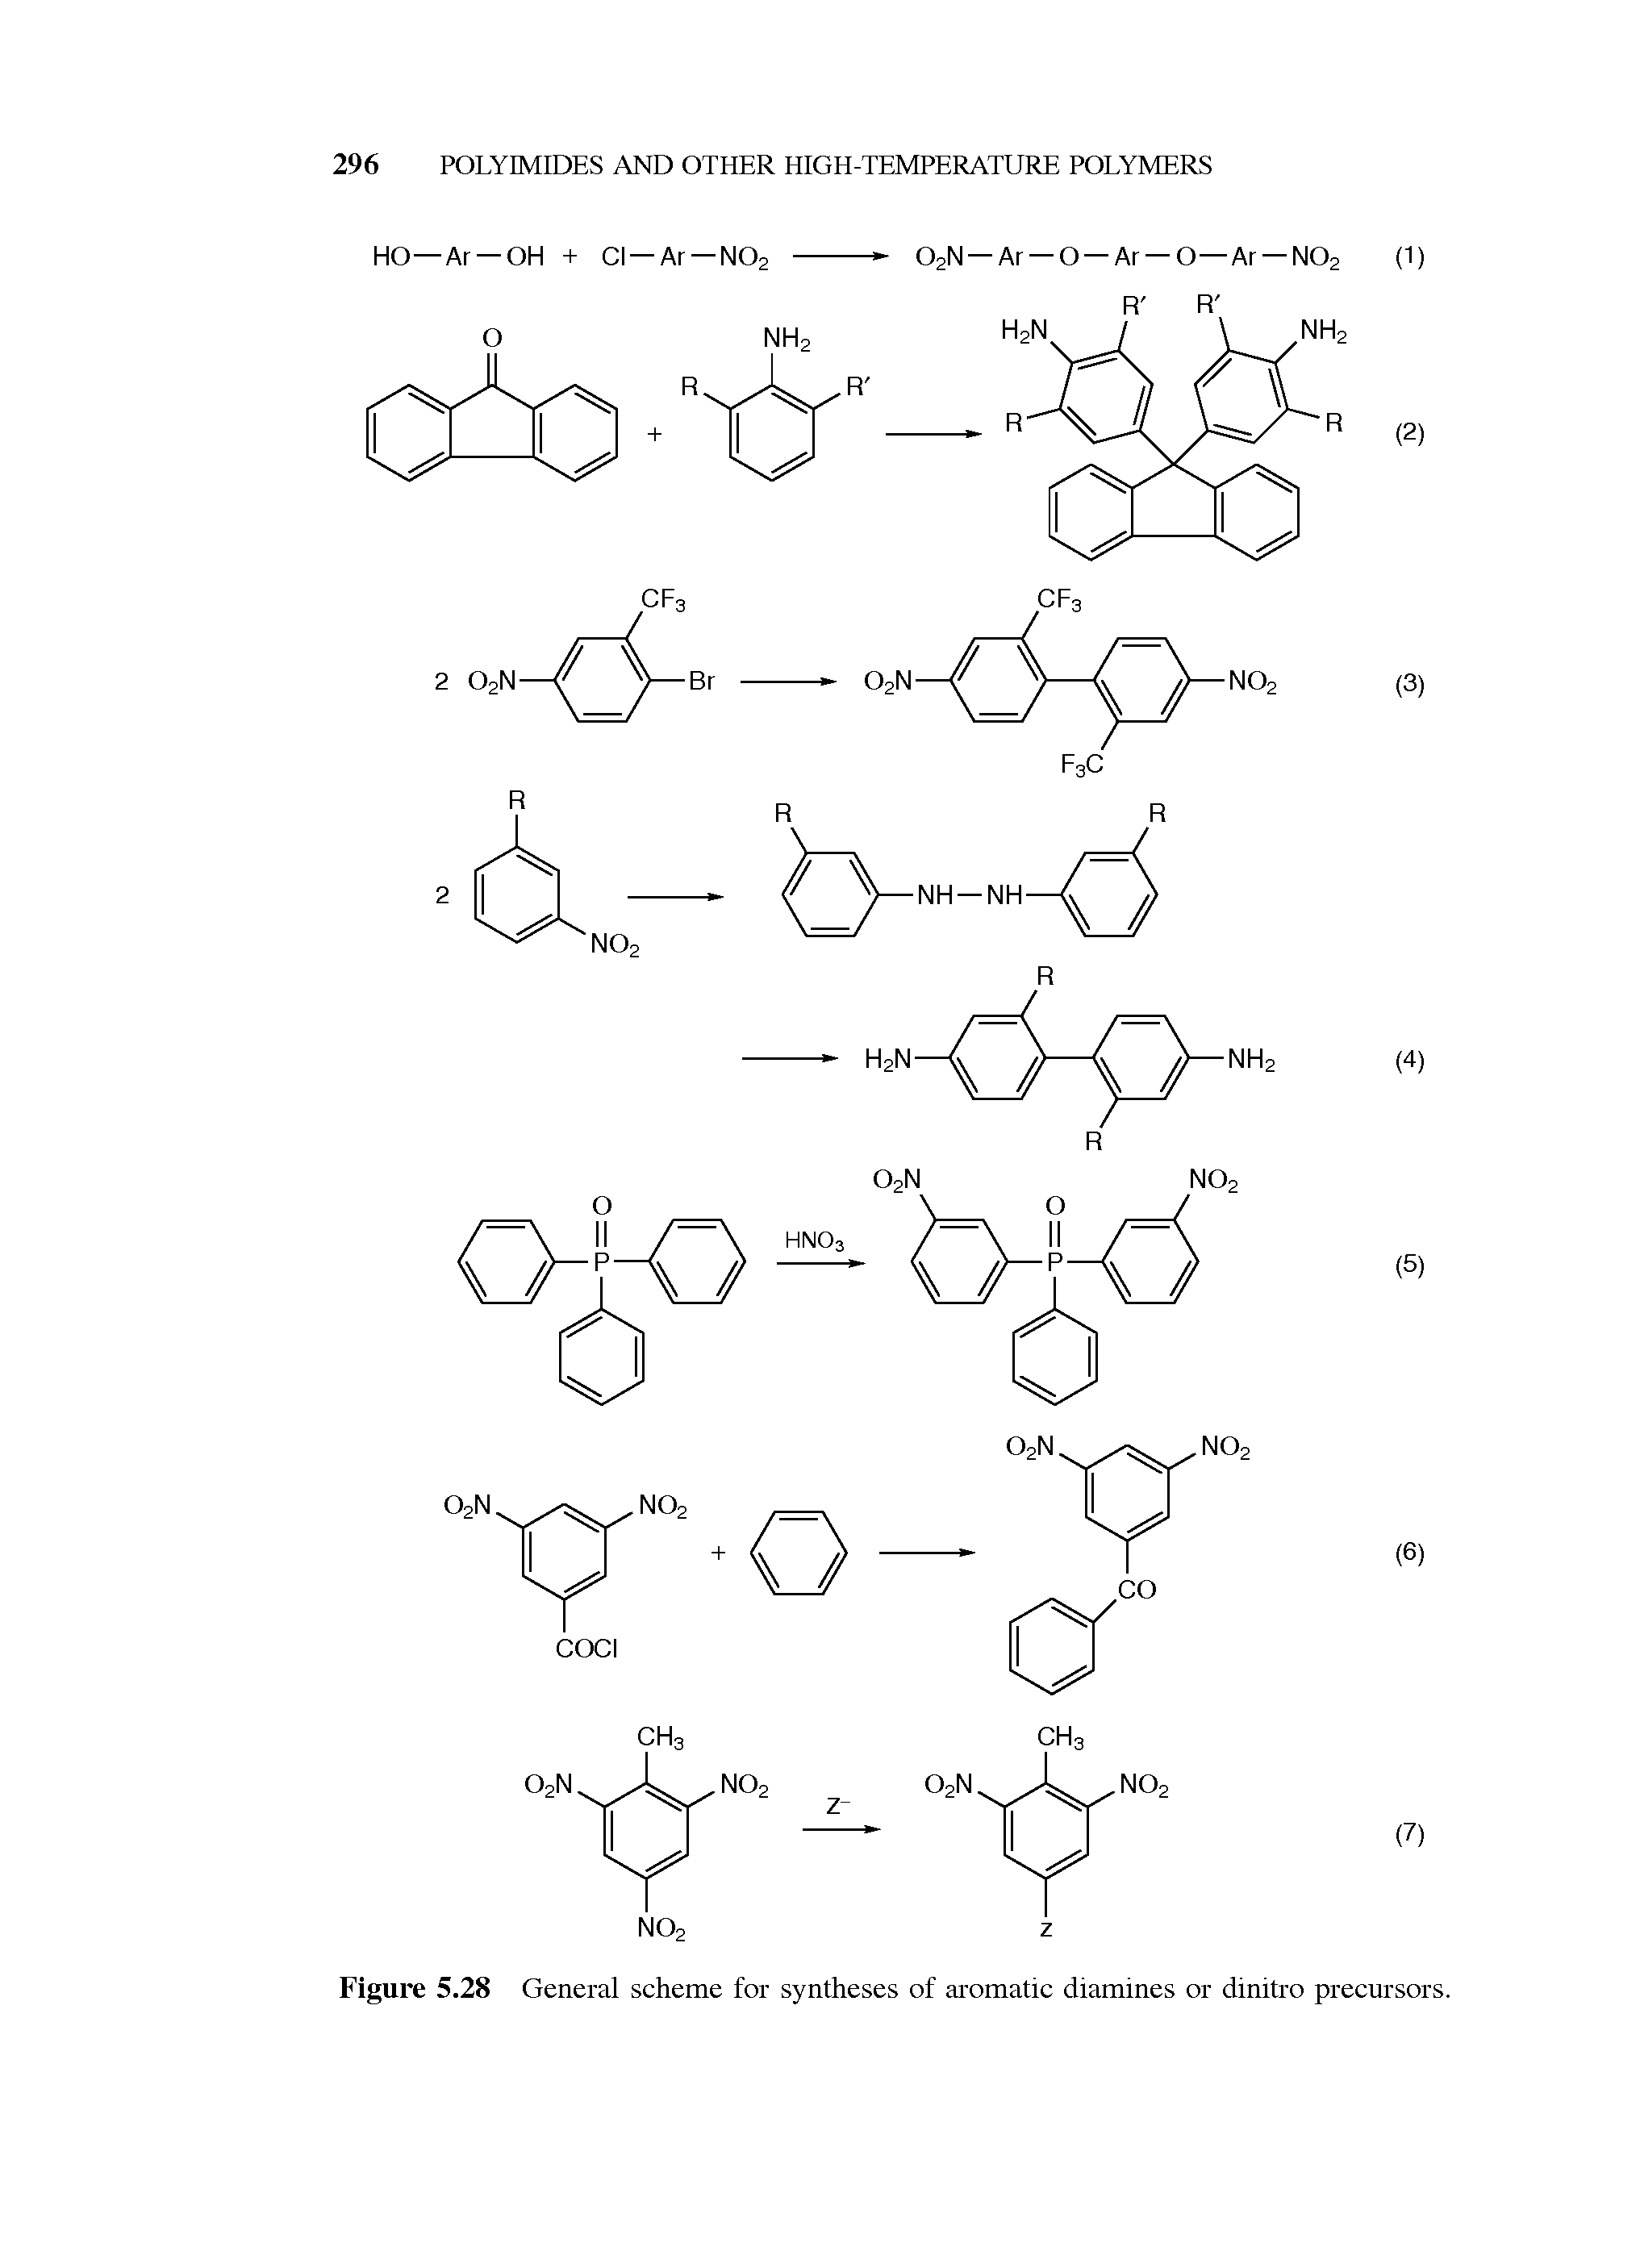 Figure 5.28 General scheme for syntheses of aromatic diamines or dinitro precursors.